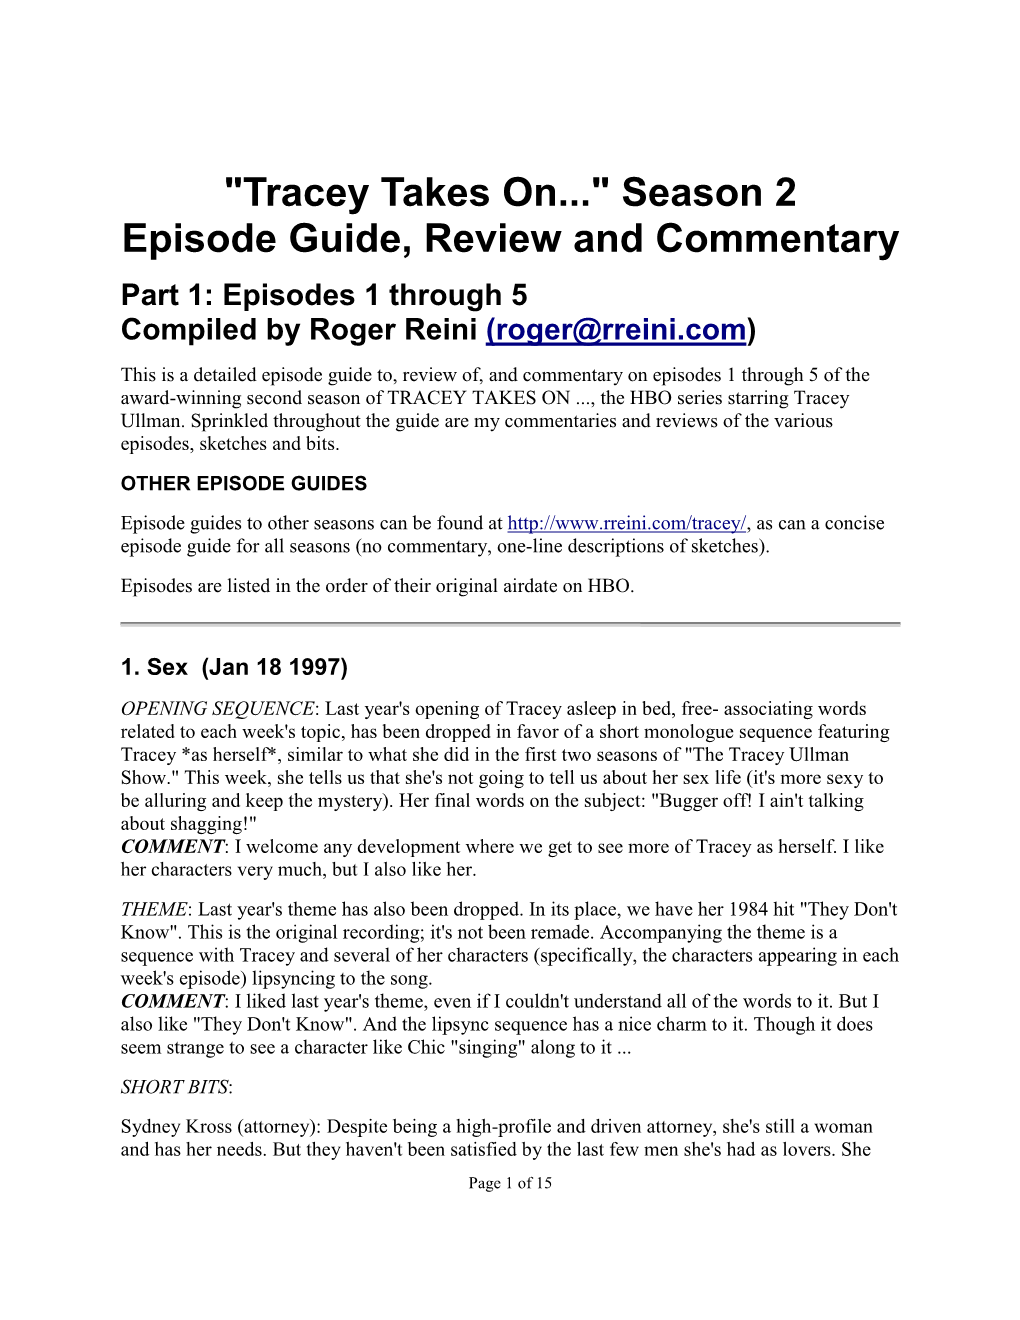 Commentary on Season 2, Eps. 1-5 of "Tracey Takes On..."